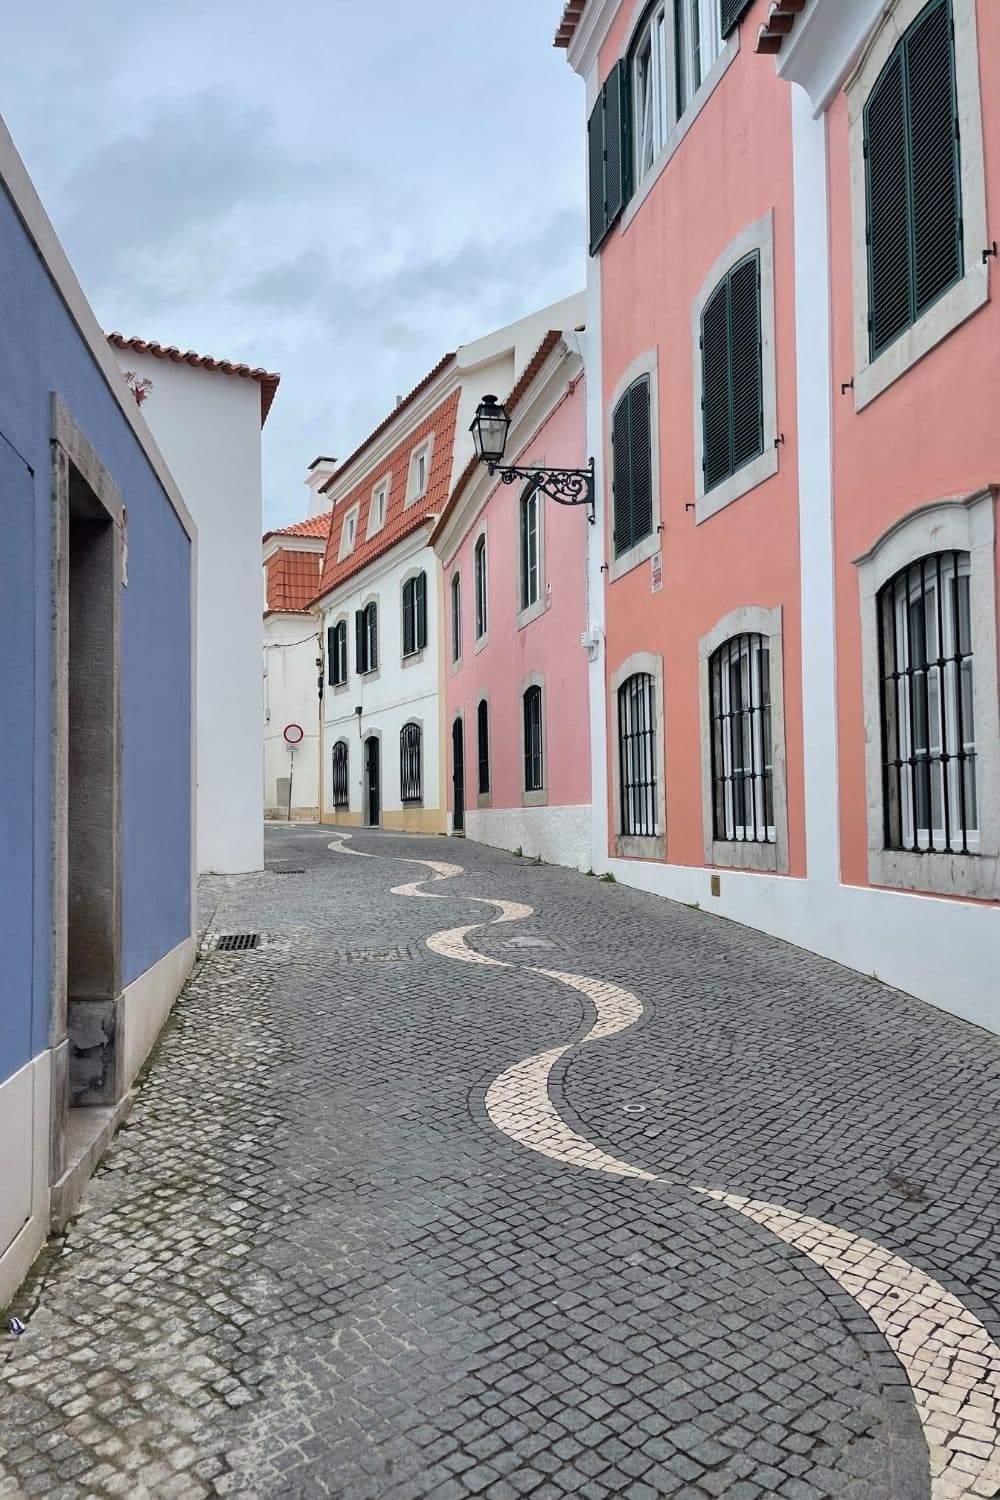 A quaint, curving cobblestone street lined with colorful pastel houses with traditional architecture, under a grey sky. The street features decorative, wave-patterned stone work and a vintage street lamp.